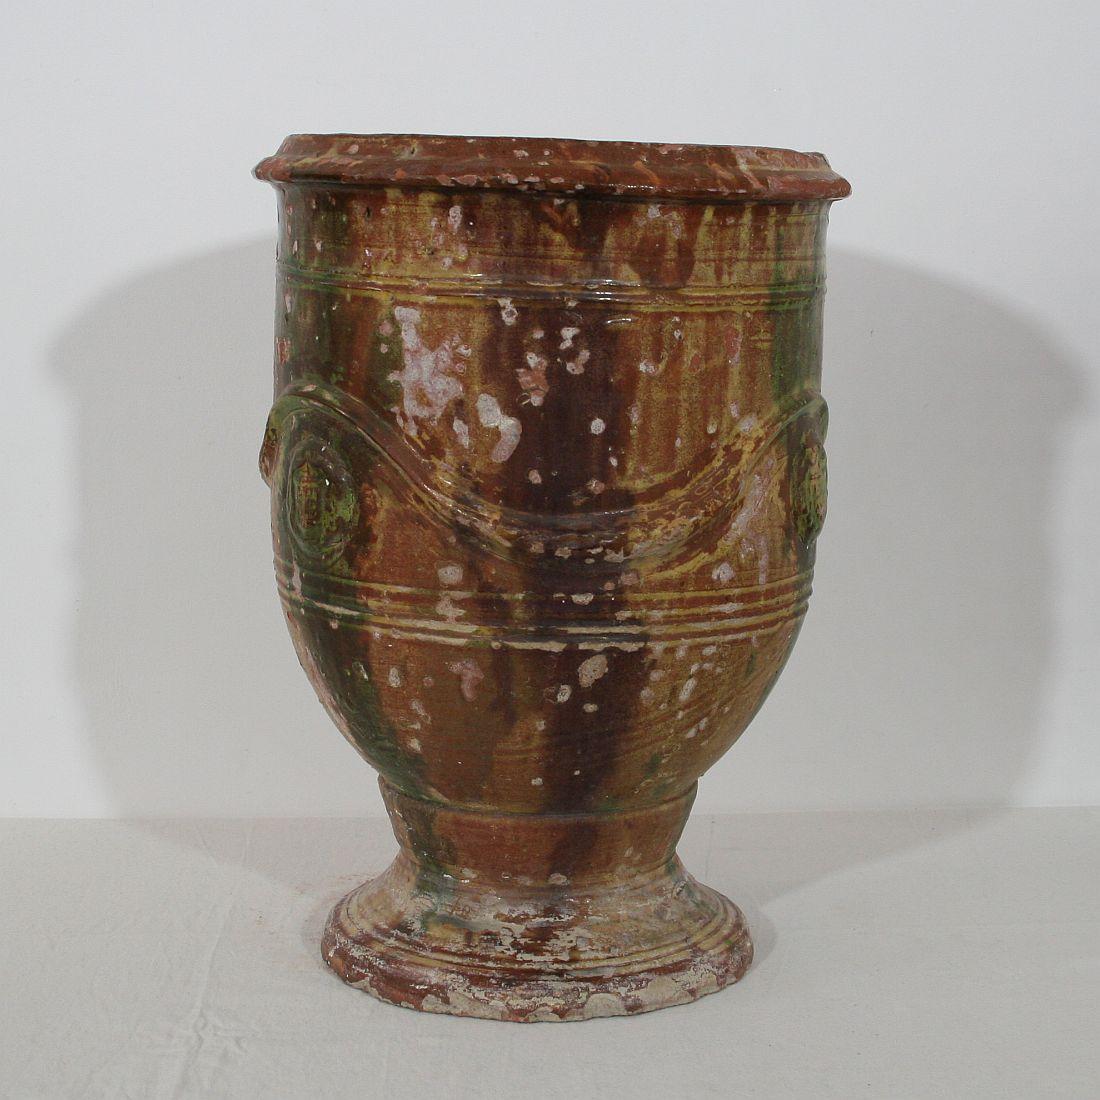 Hand-Crafted 19th Century French Glazed Terracotta Anduze Vase, Planter